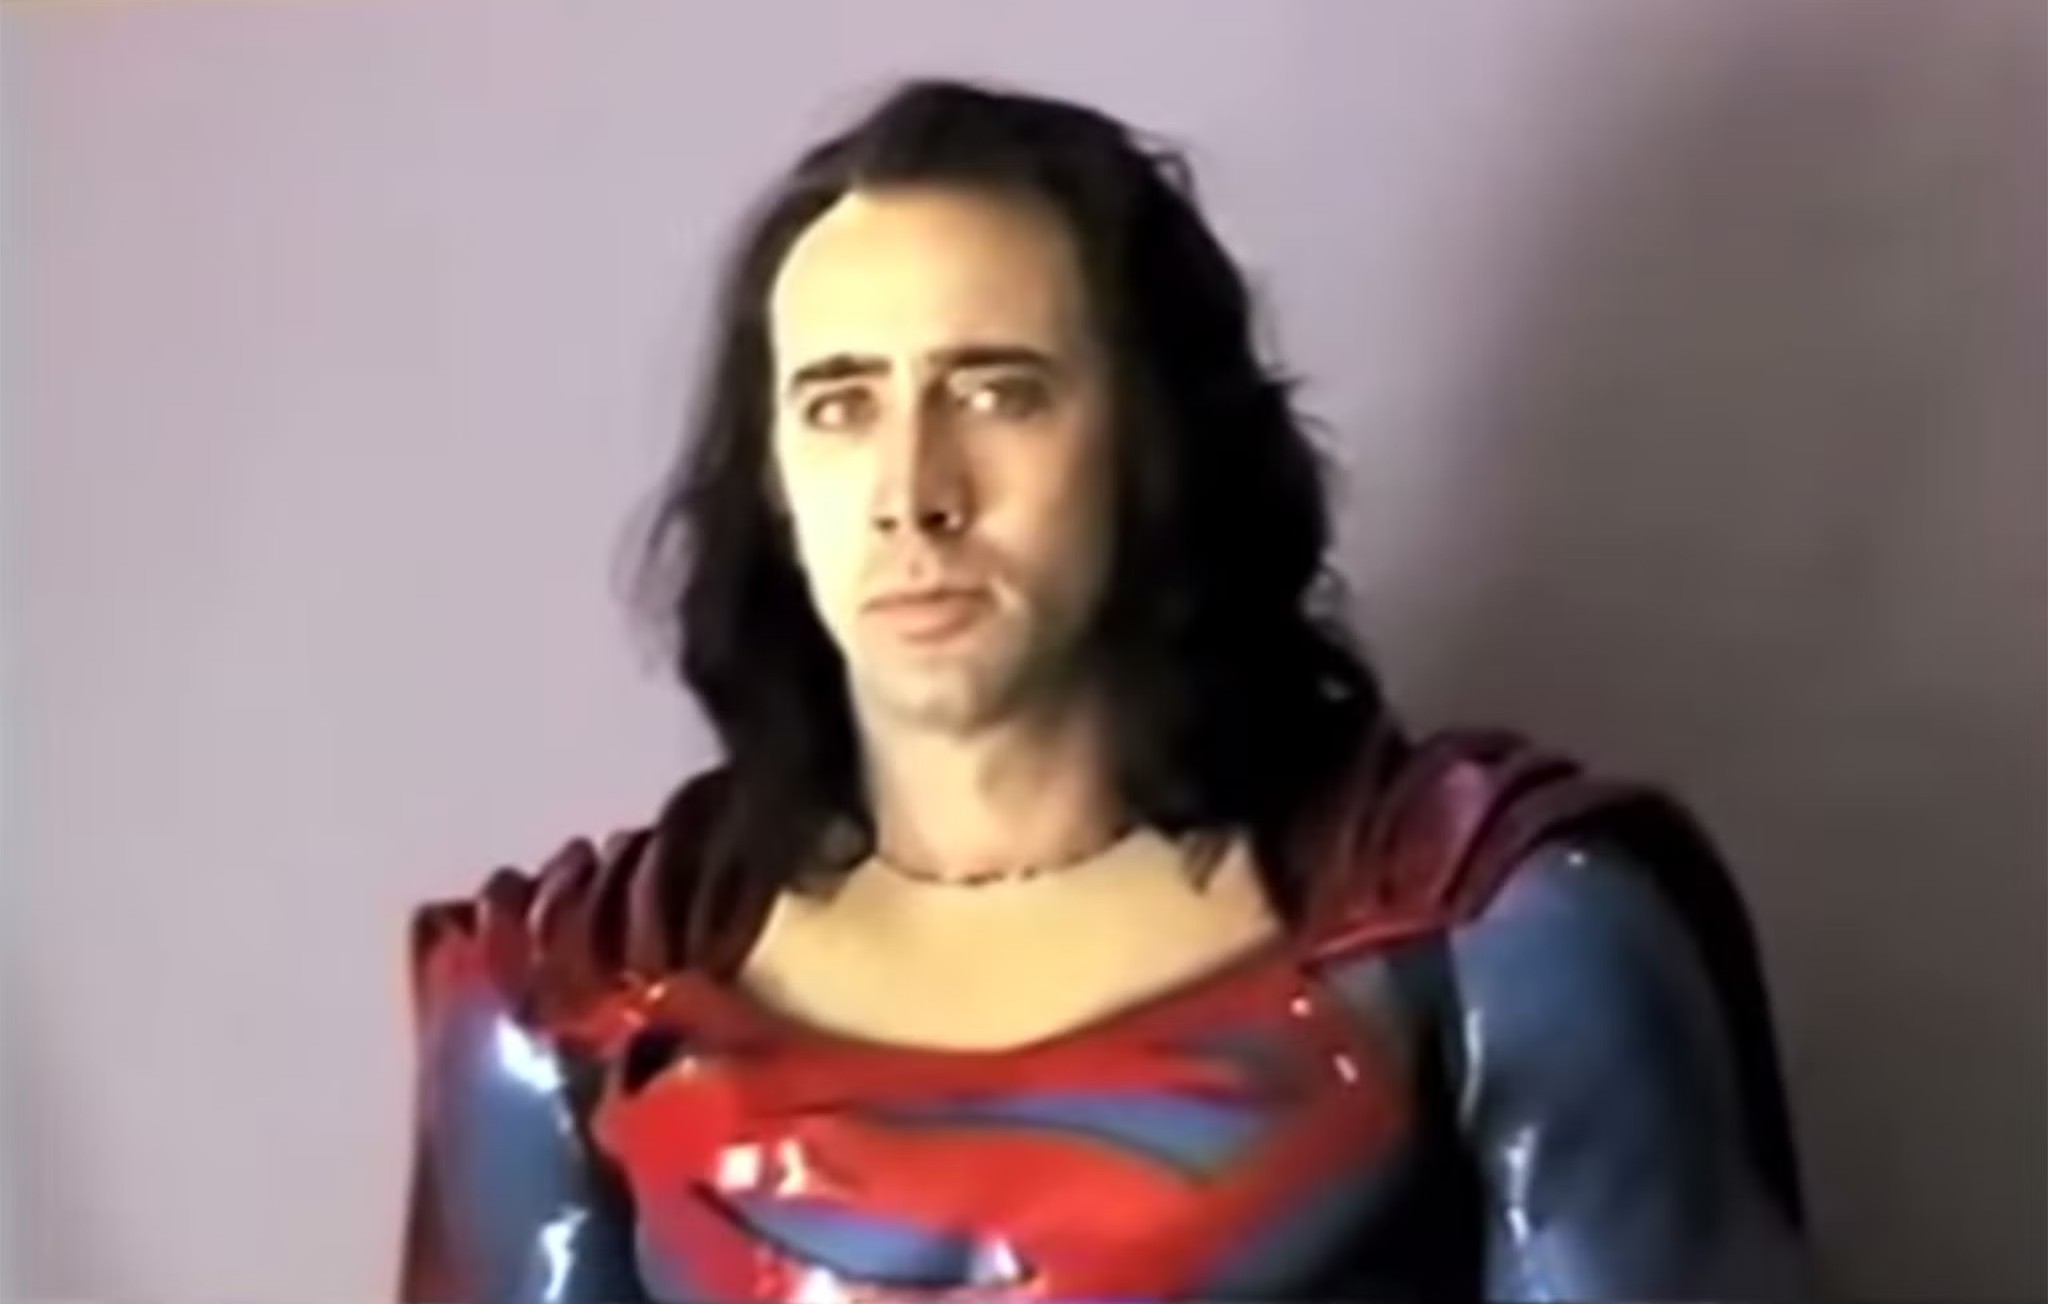 Nicolas Cage’s Superman will be in The Flash movie for some reason